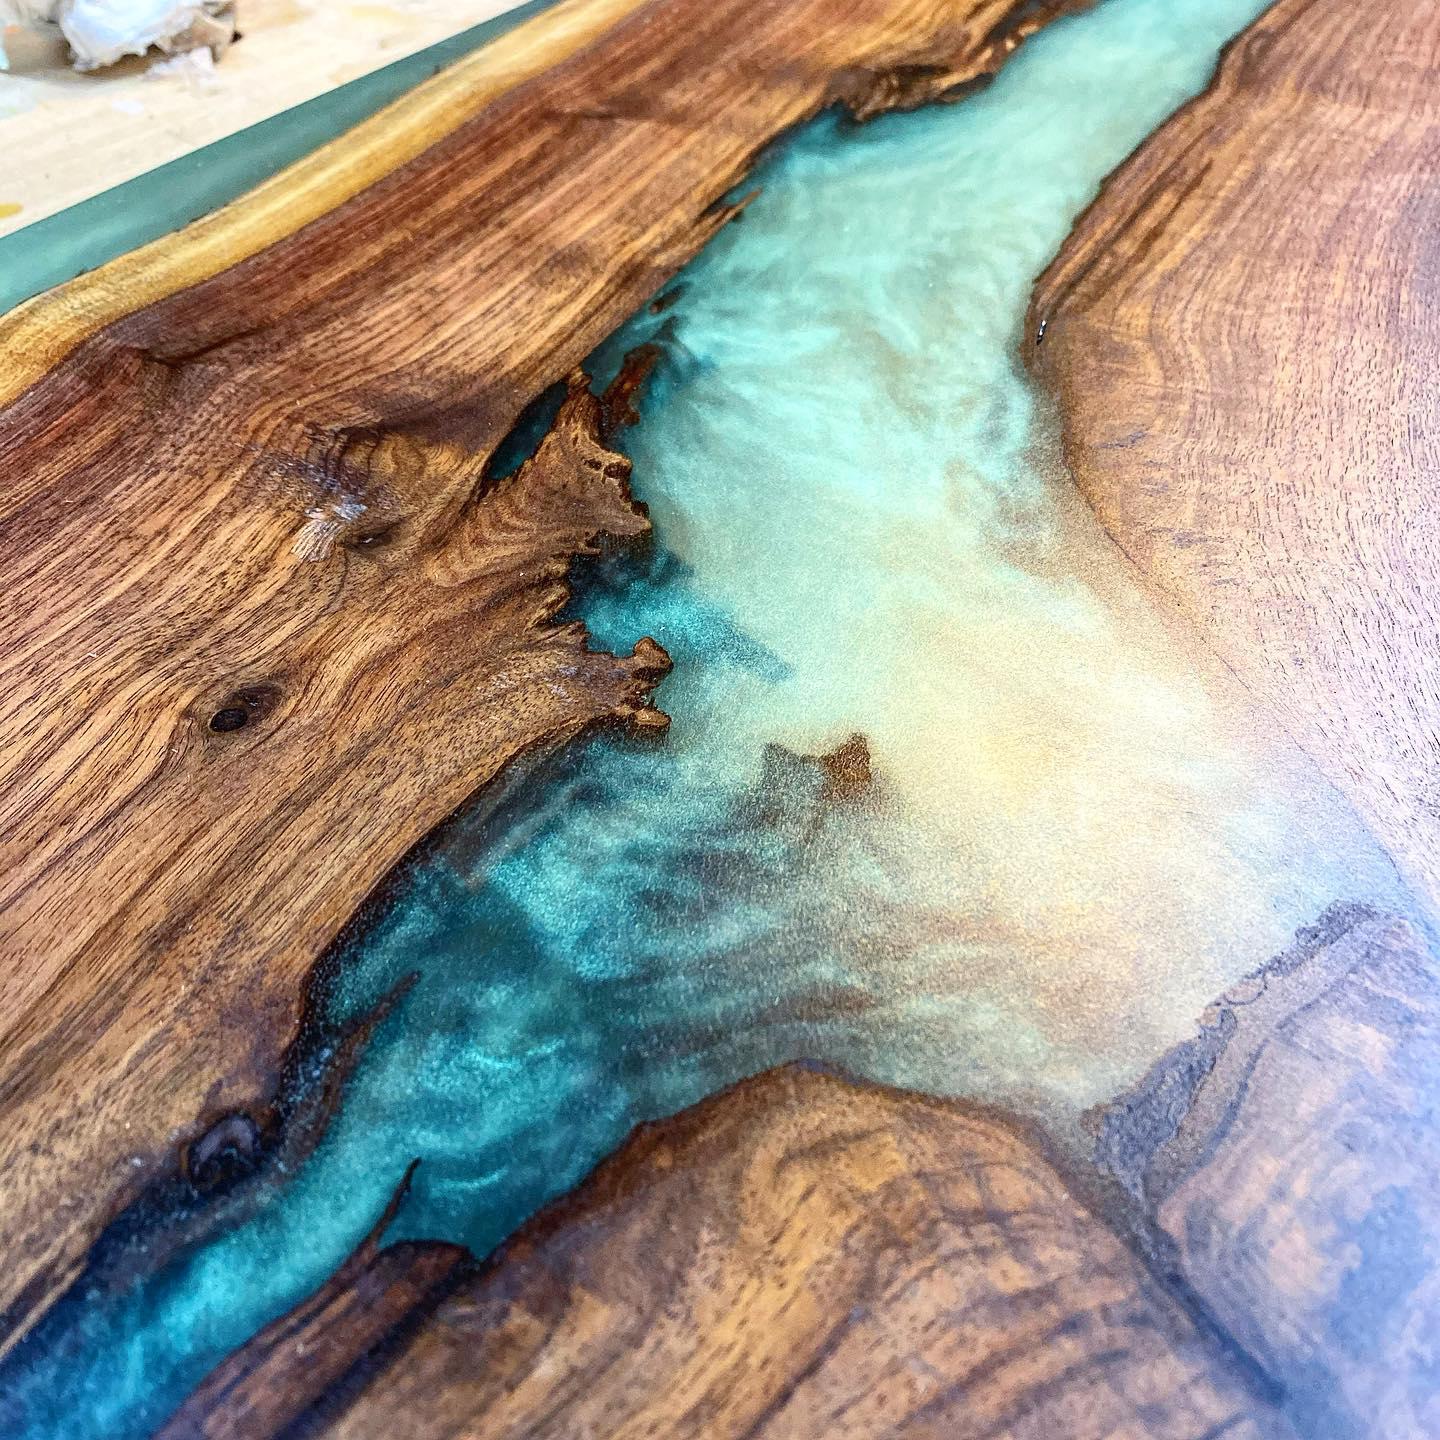 Goodview Woodworks offers exquisite river tables that seamlessly blend natural wood with mesmerizing resin designs, creating stunning centerpieces for your living space. Our river tables are handcrafted to perfection, showcasing the beauty of nature in every piece.